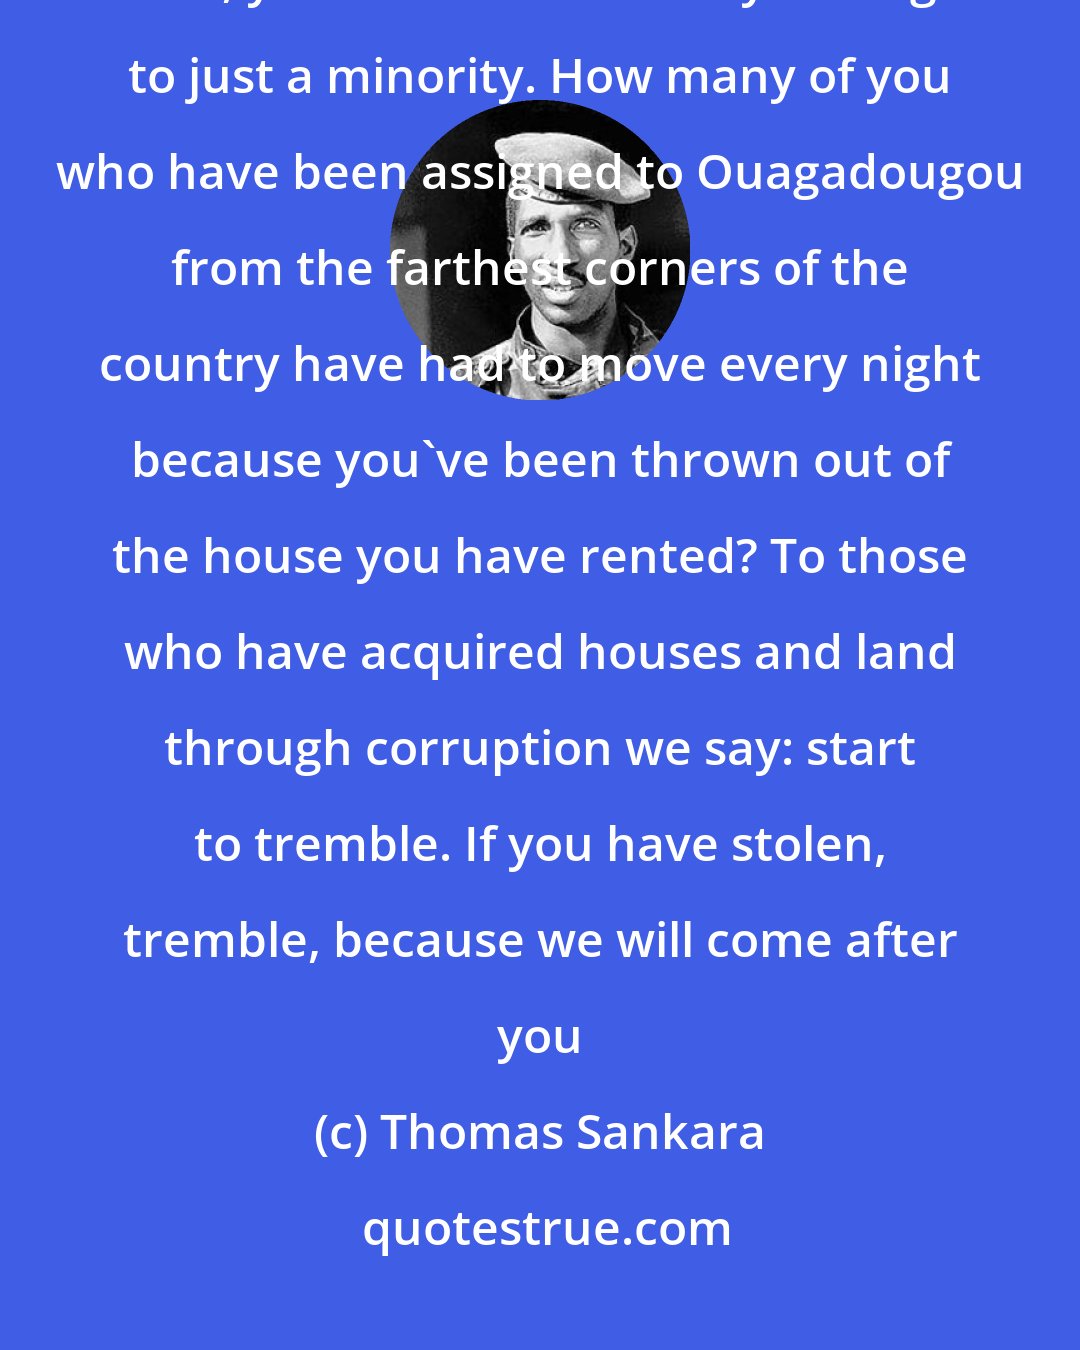 Thomas Sankara: If you take a walk around Ouagadougou and make a list of the mansions you see, you will note that they belong to just a minority. How many of you who have been assigned to Ouagadougou from the farthest corners of the country have had to move every night because you've been thrown out of the house you have rented? To those who have acquired houses and land through corruption we say: start to tremble. If you have stolen, tremble, because we will come after you